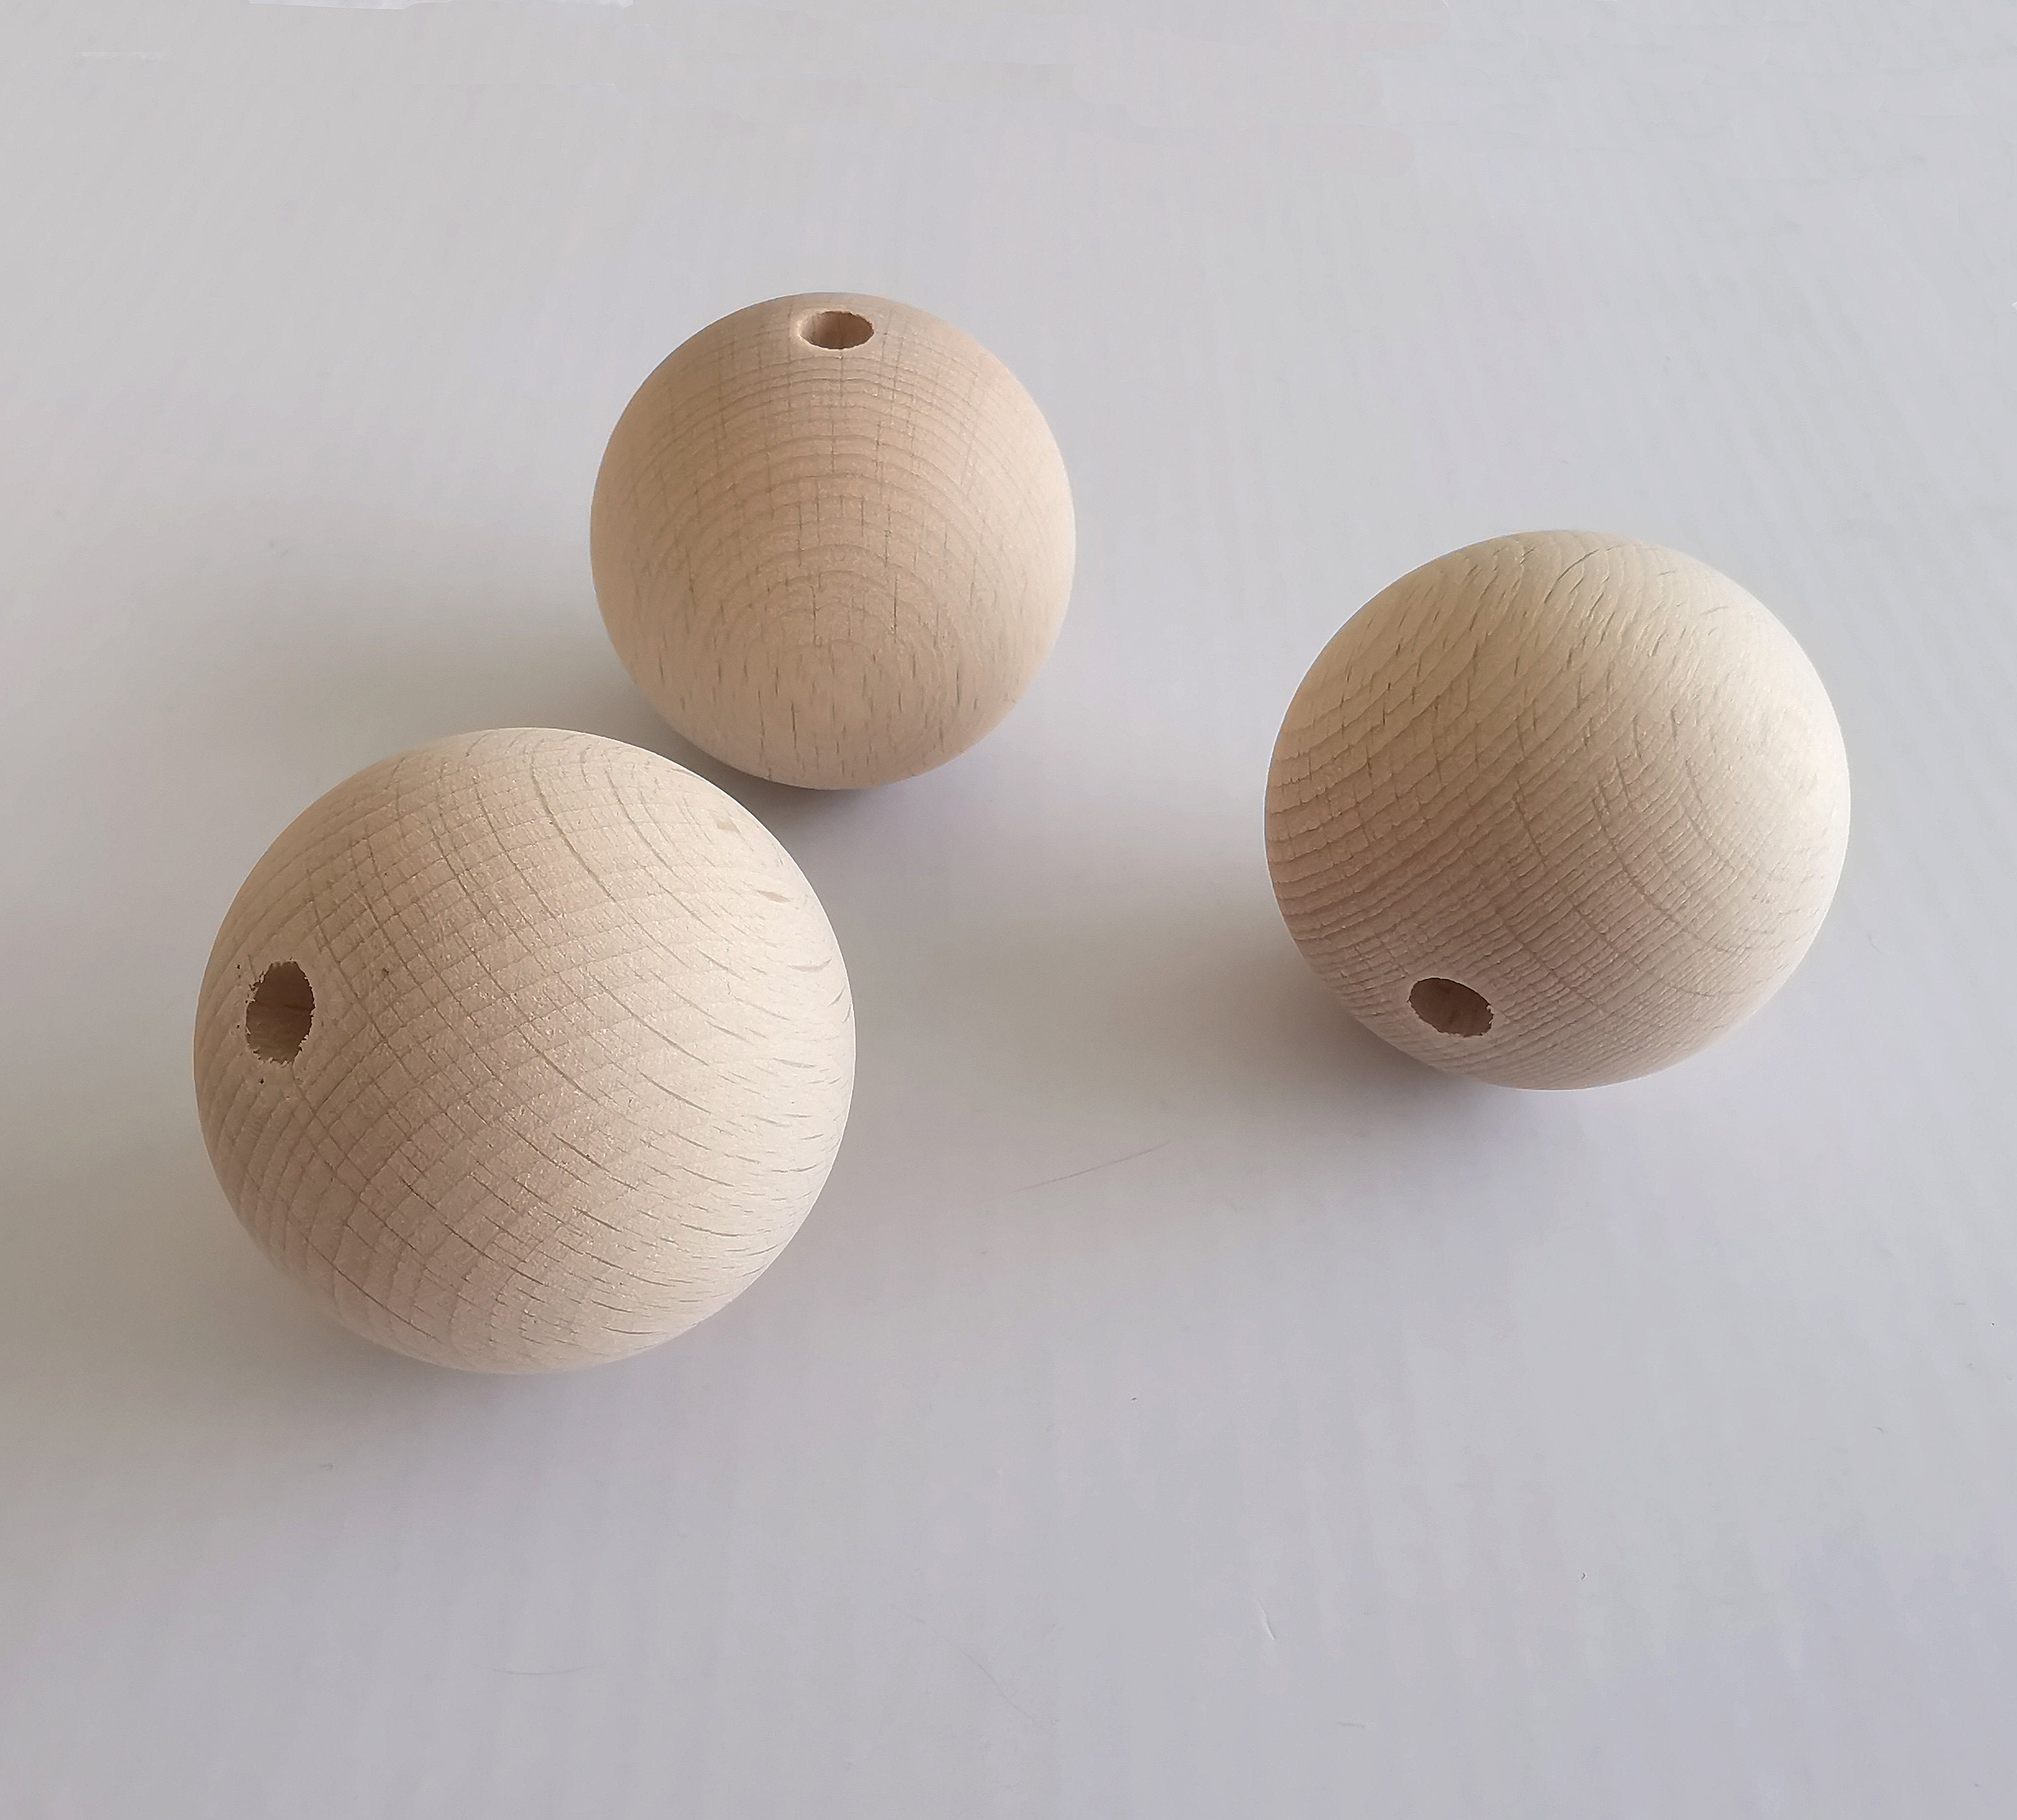 4-10 Pieces Large Beads,natural Wood Beads,wooden Round Beads 40mm